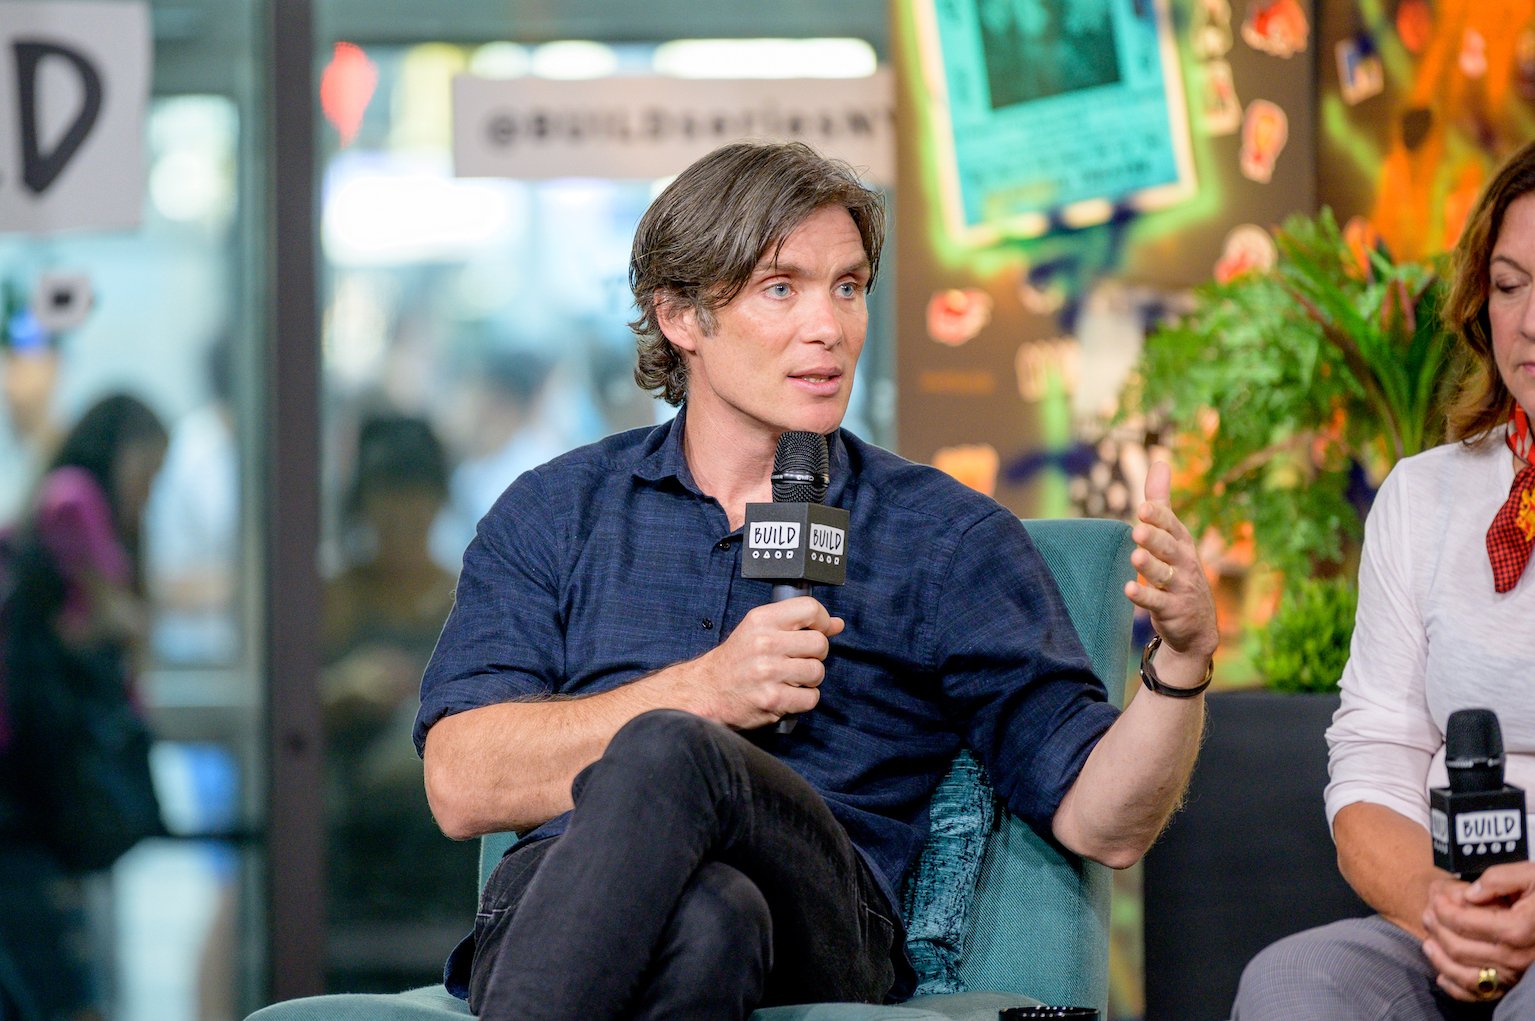 Cillian Murphy, Thomas Shelby from 'Peaky Blinders' Season 6, sits and talks into a microphone at the Build Series